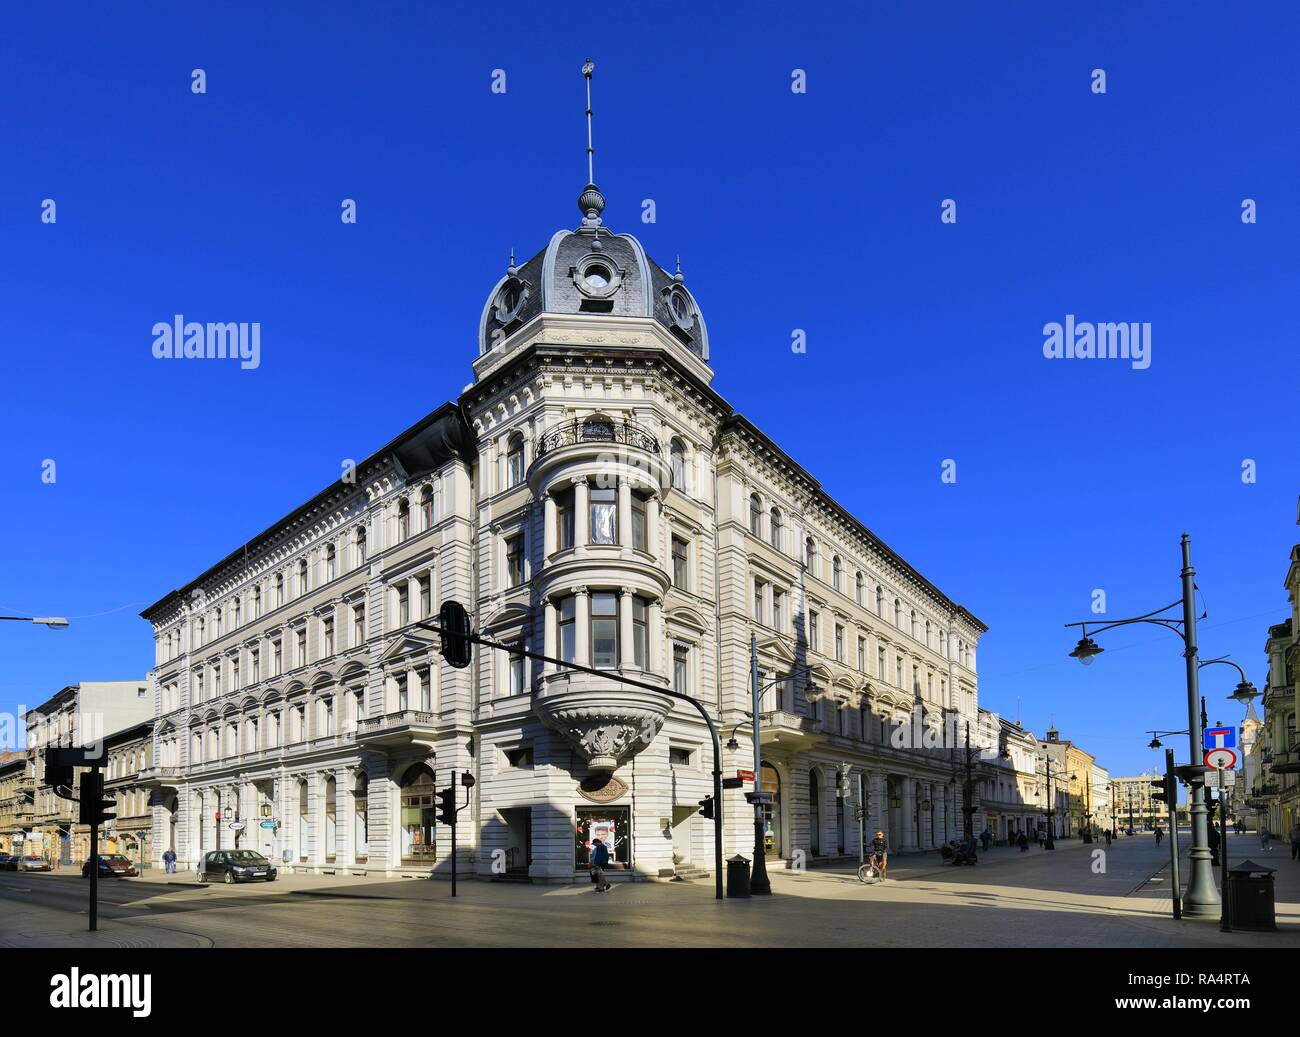 Ulica Piotrkowska High Resolution Stock Photography And Images Alamy